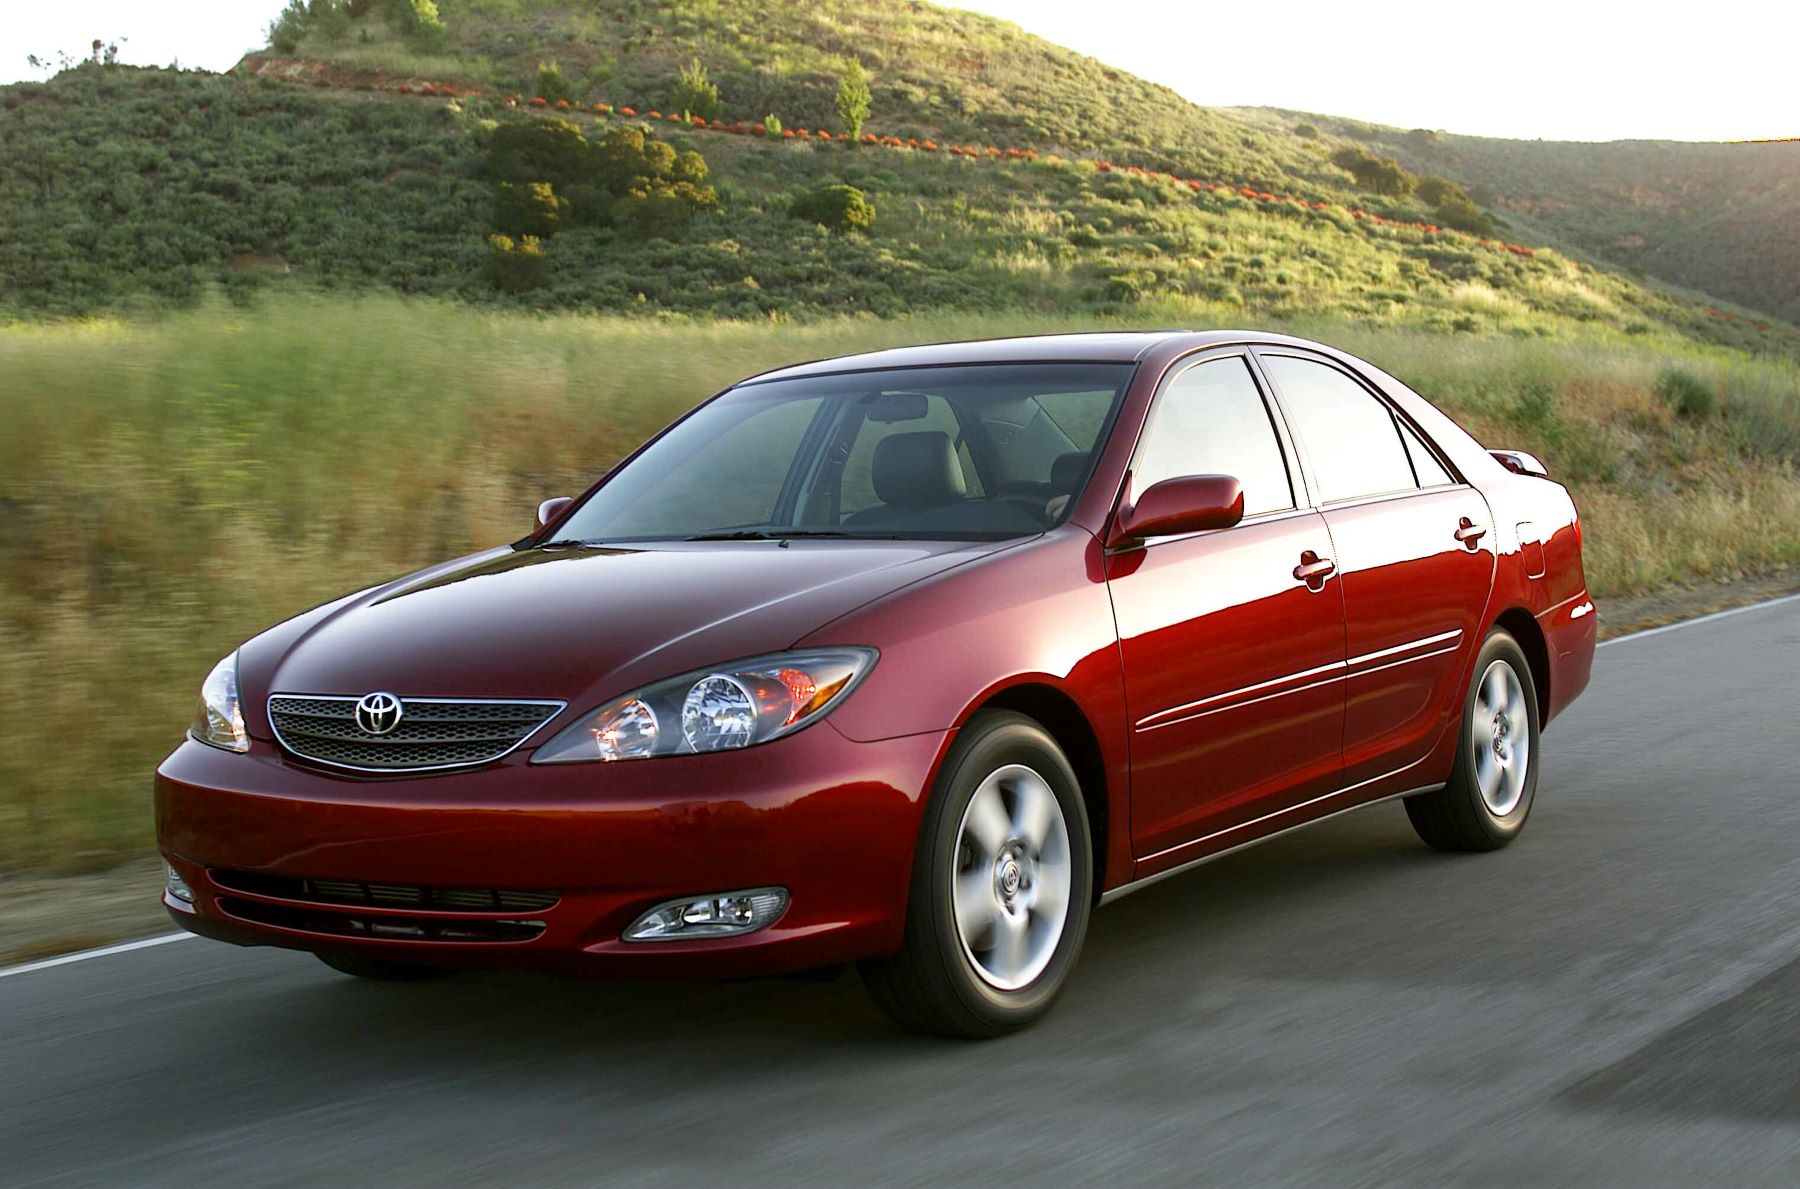 A dark red Toyota Camry midsize sedan model from the 2002 to 2006 model year generation